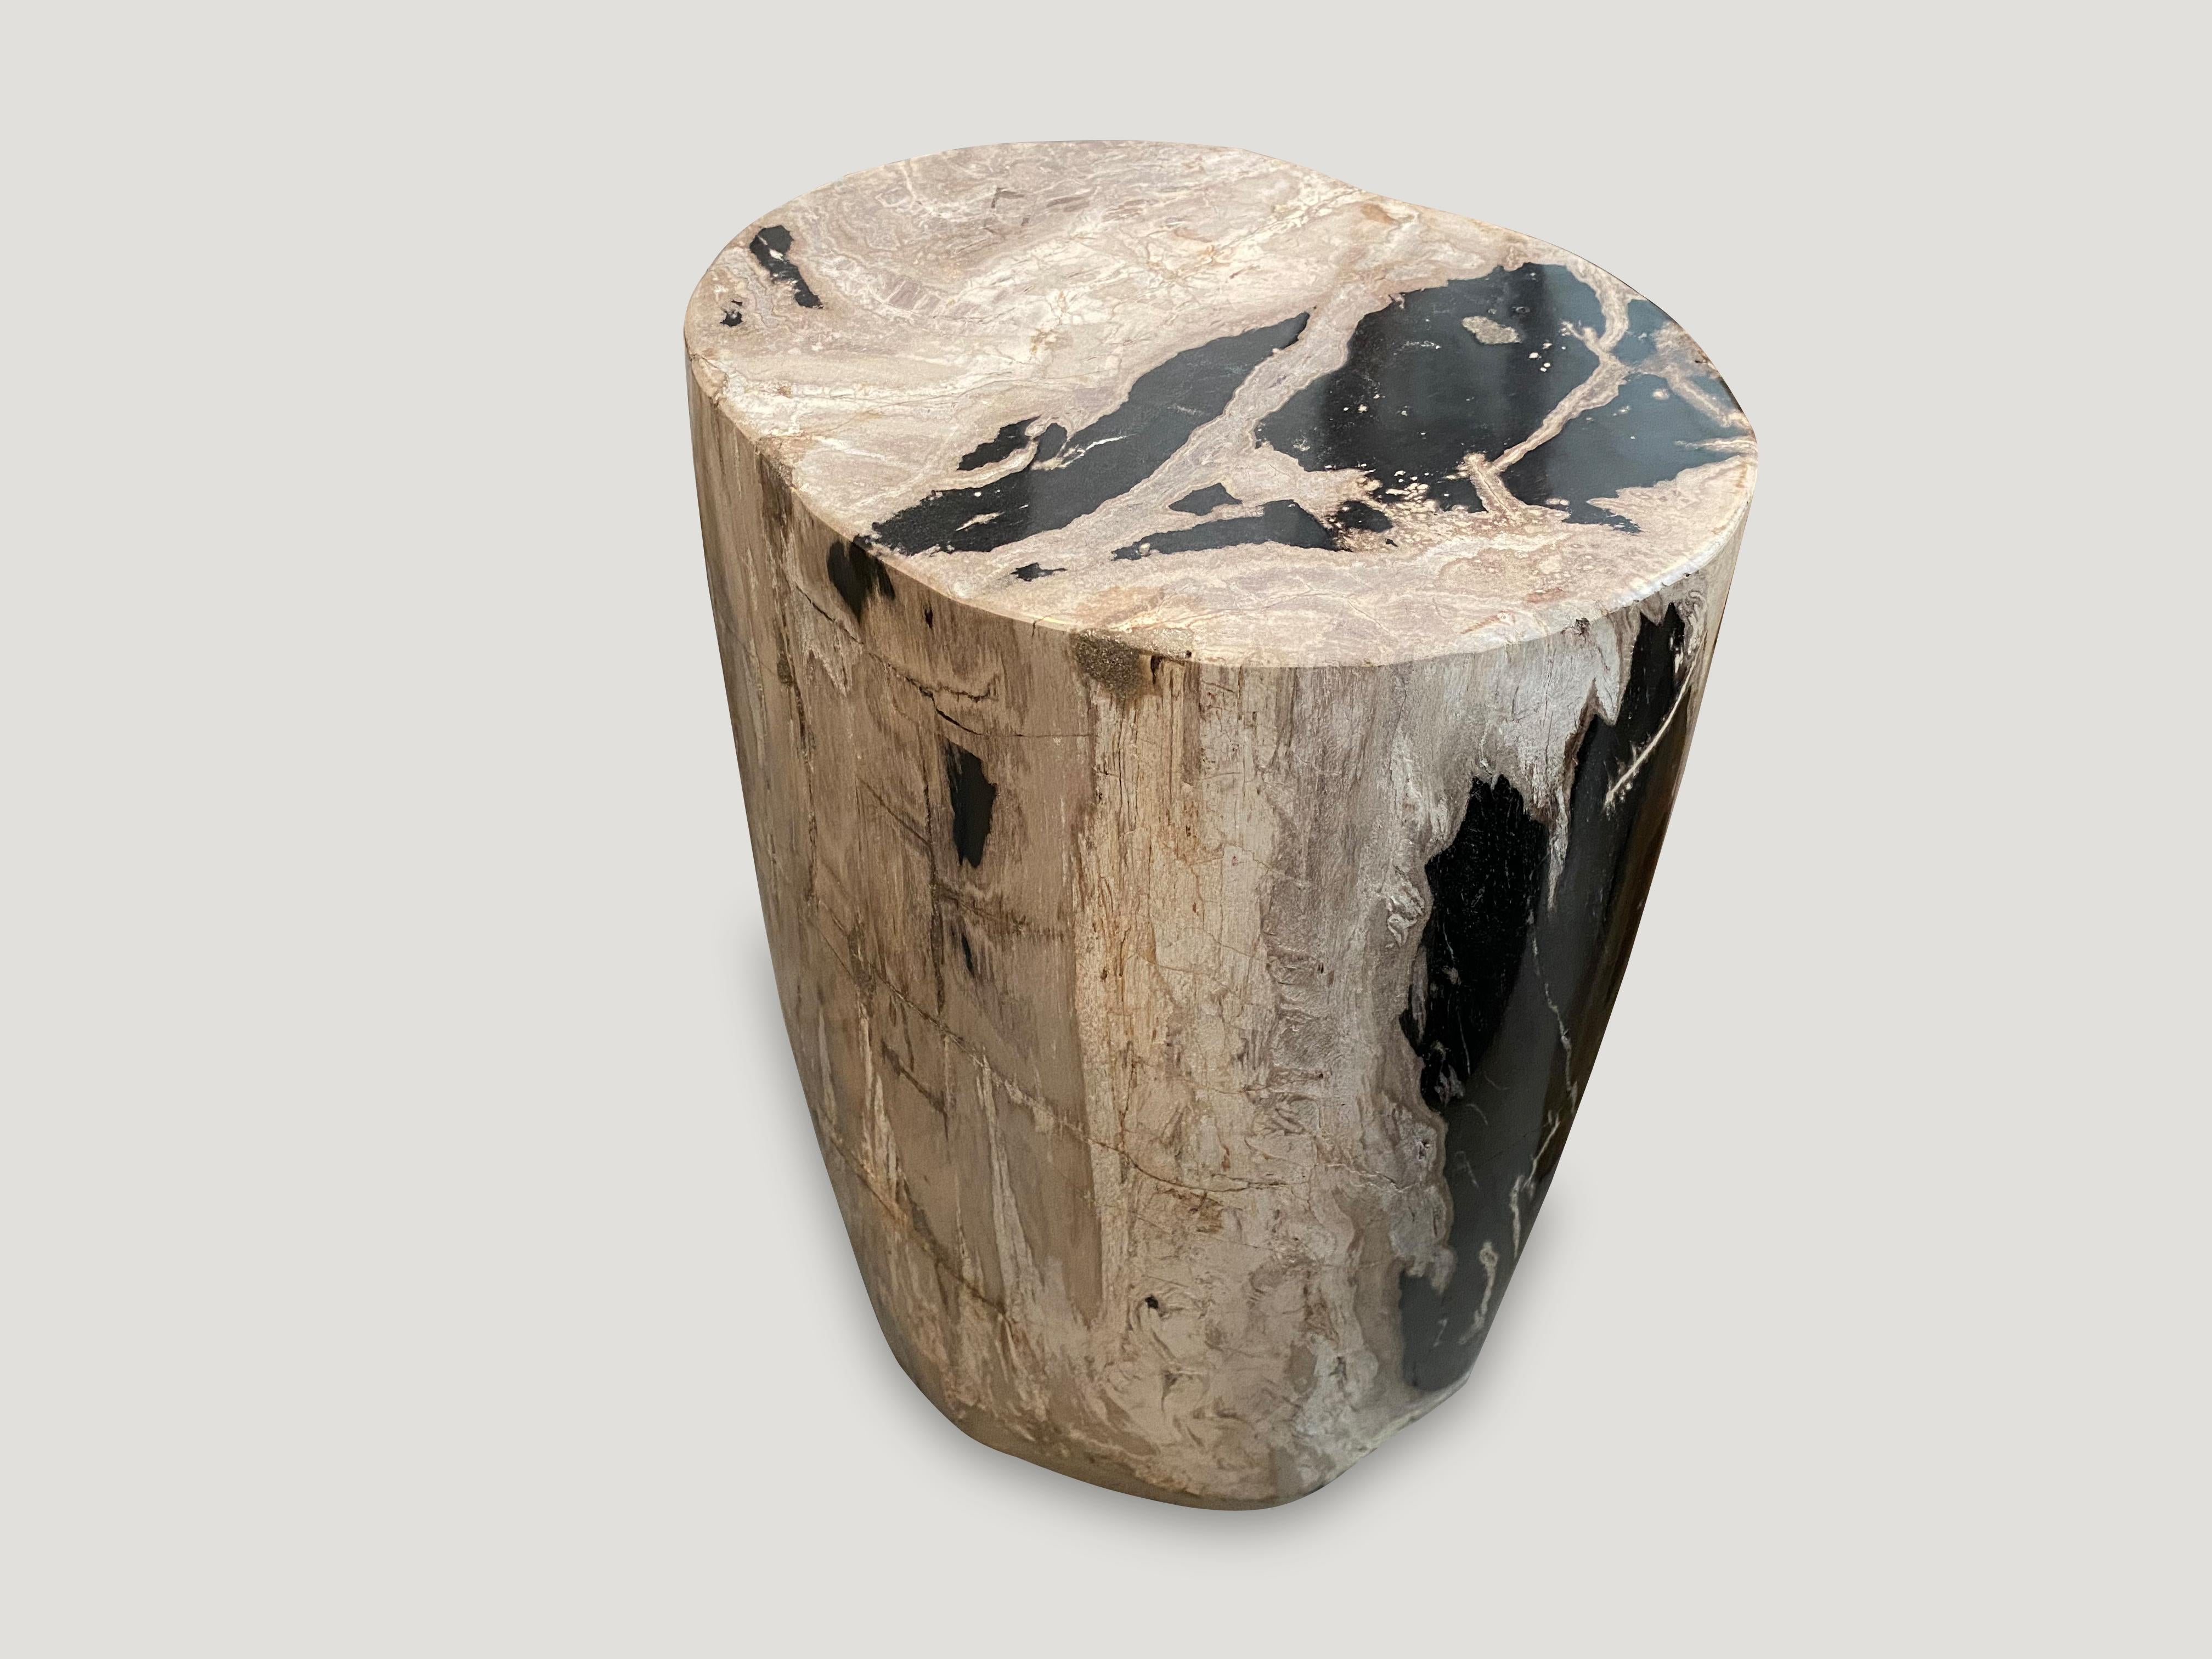 Beige and black high quality petrified wood side table. It’s fascinating how Mother Nature produces these exquisite 40 million year old petrified teak logs with such contrasting colors and natural patterns throughout. Modern yet with so much